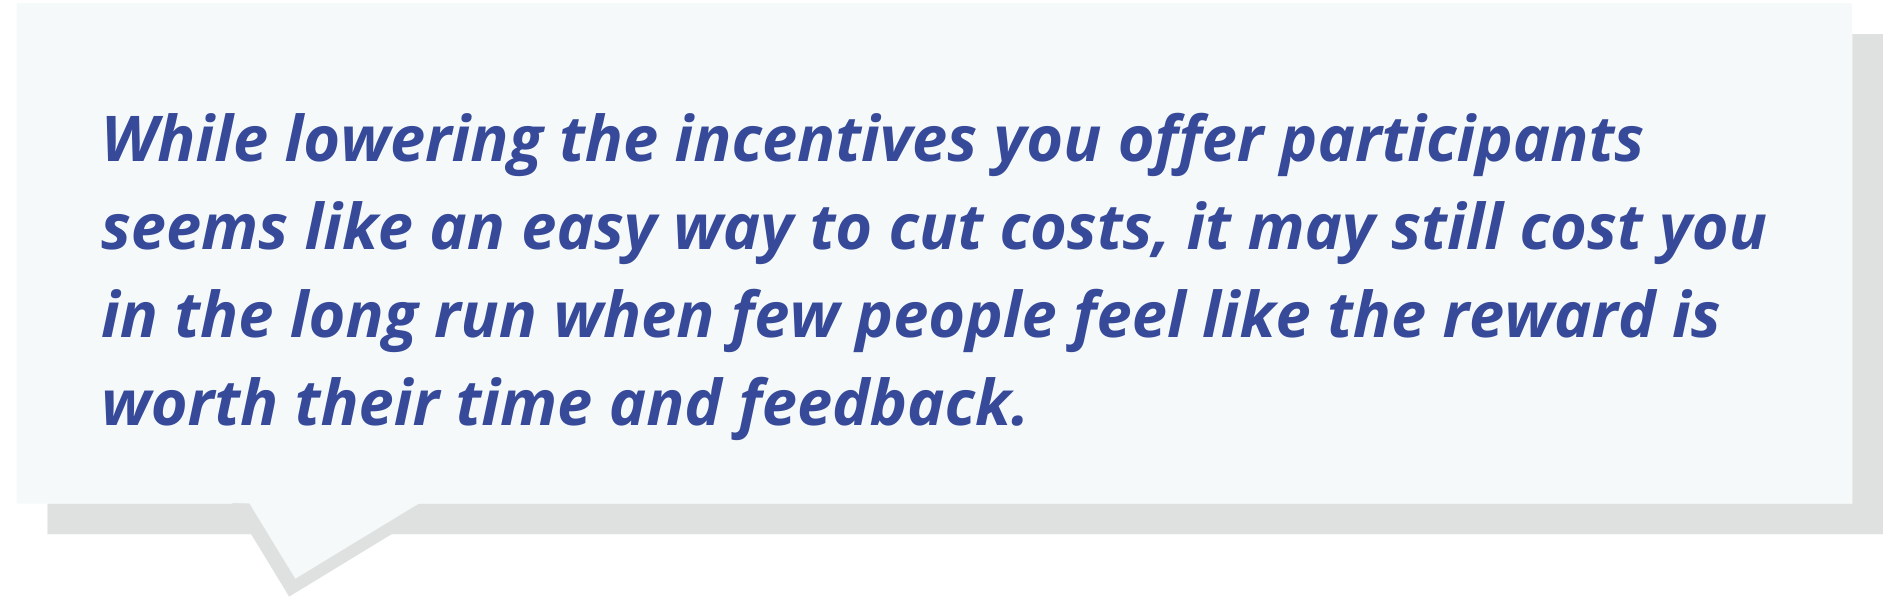 While lowering the incentives you offer participants seems like an easy way to cut costs, it may still cost you in the long run when few people feel like the reward is worth their time and feedback.